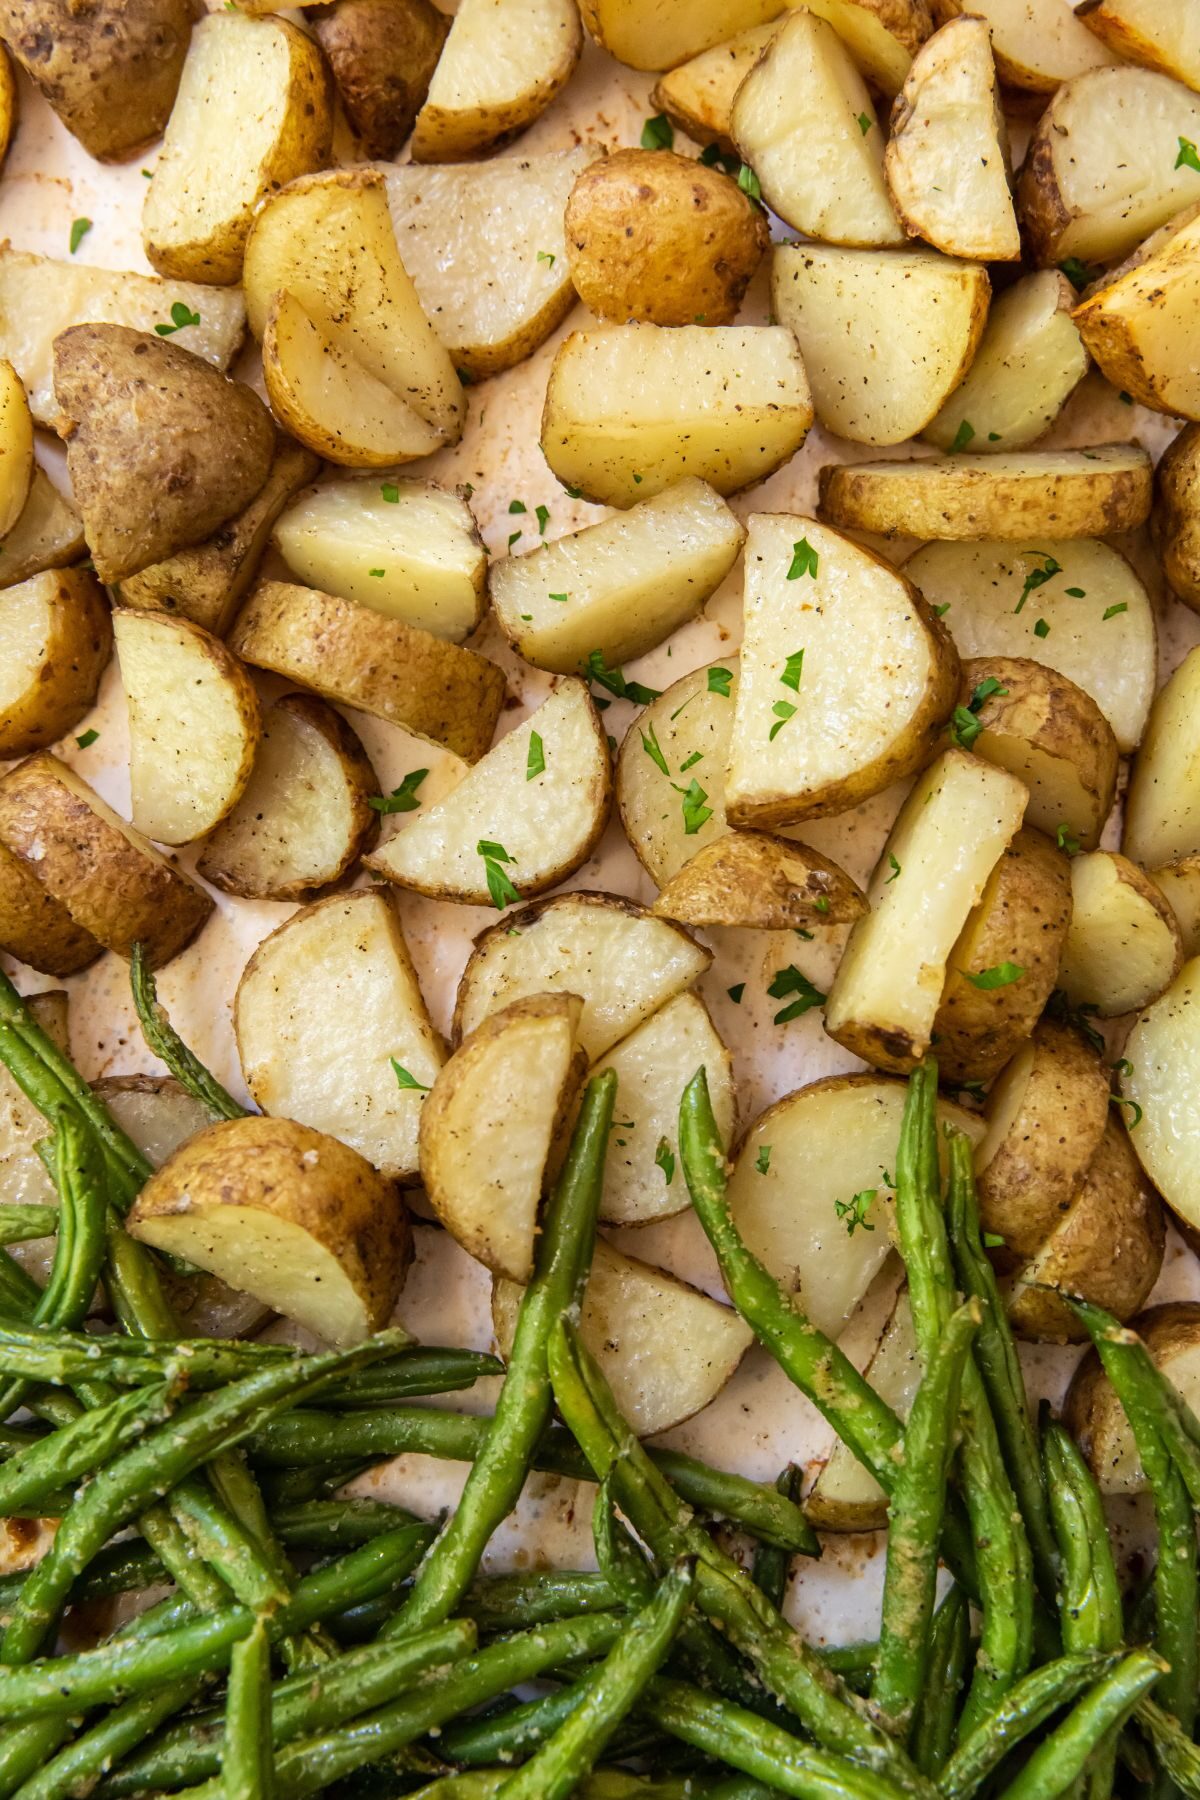 Cooking sheet with parchment paper with cooked potatoes and green beans on it